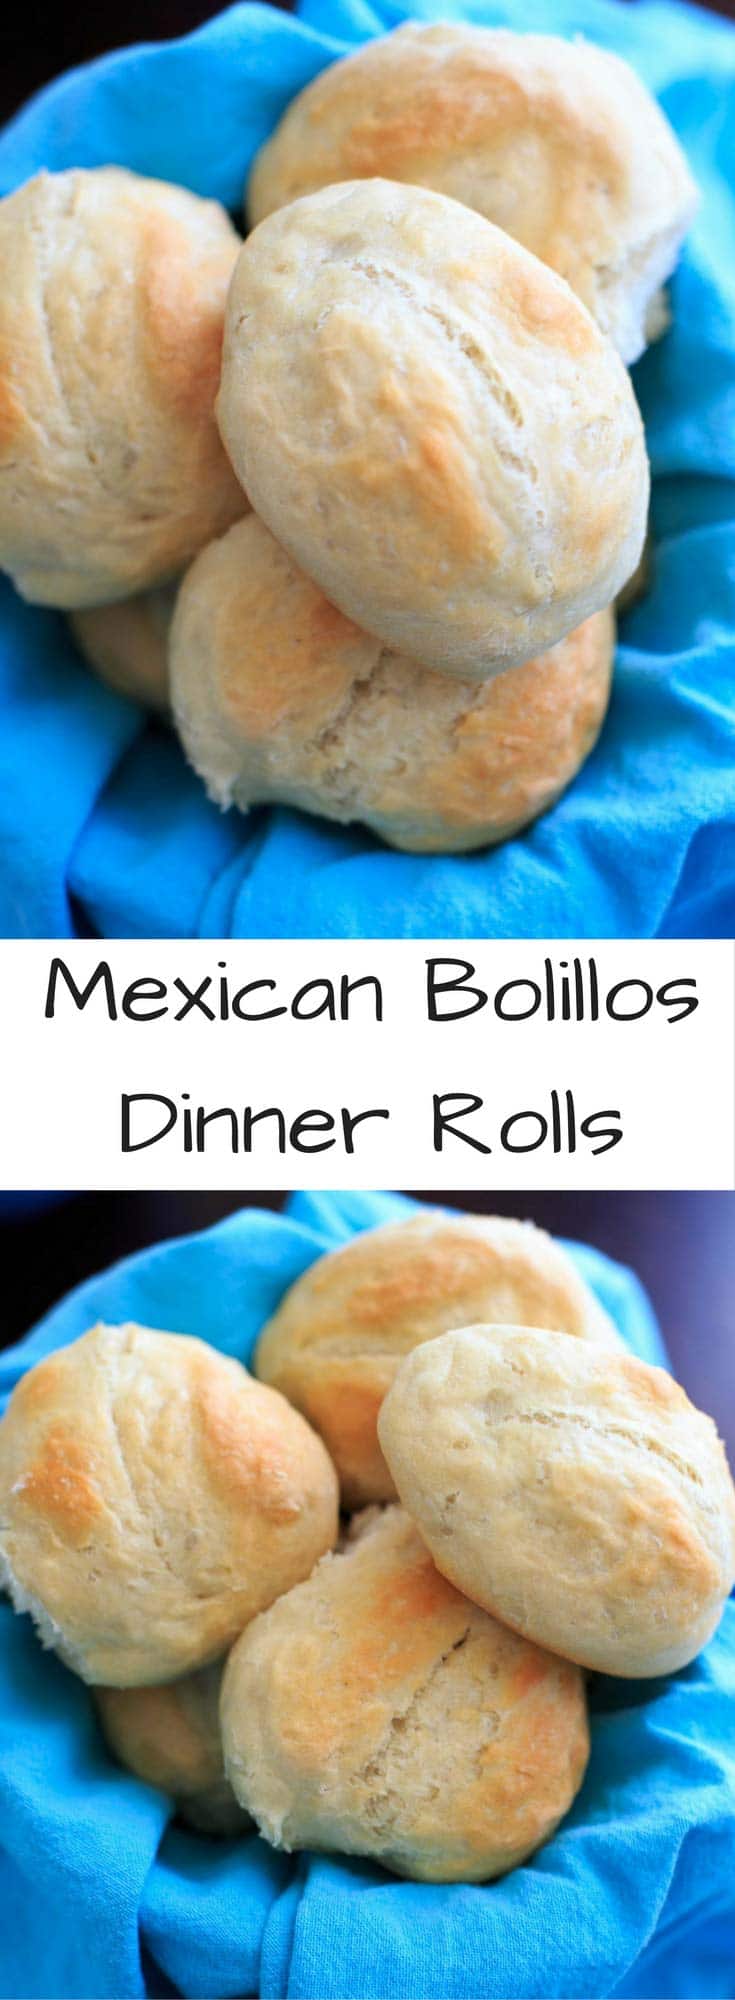 Mexican Bolillo Dinner Rolls - easy yeast roll with cornstarch glaze